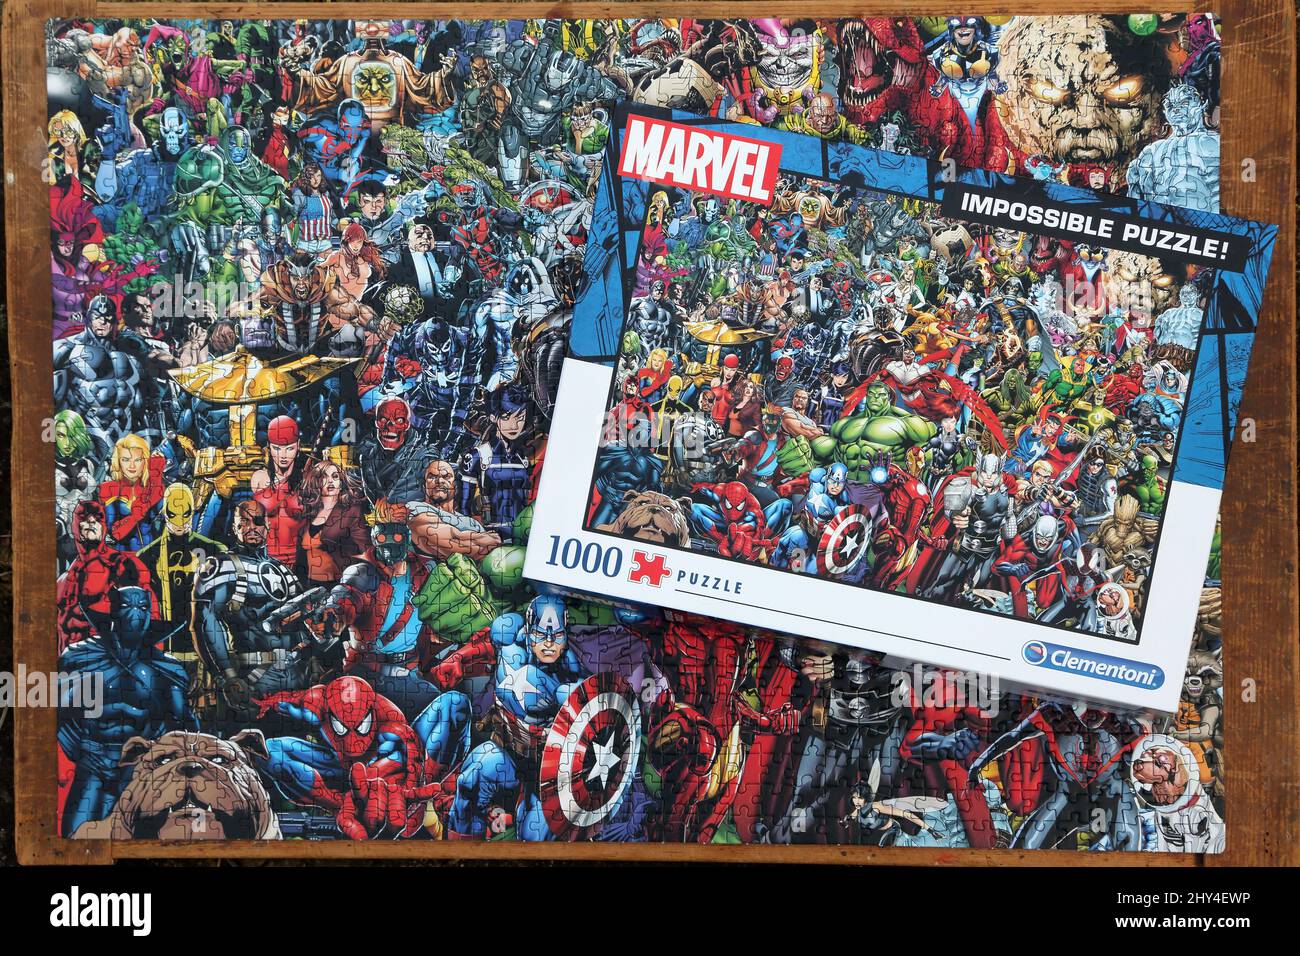 Man Doing a Marvel 1000 Piece Impossible Puzzle Stock Photo - Alamy